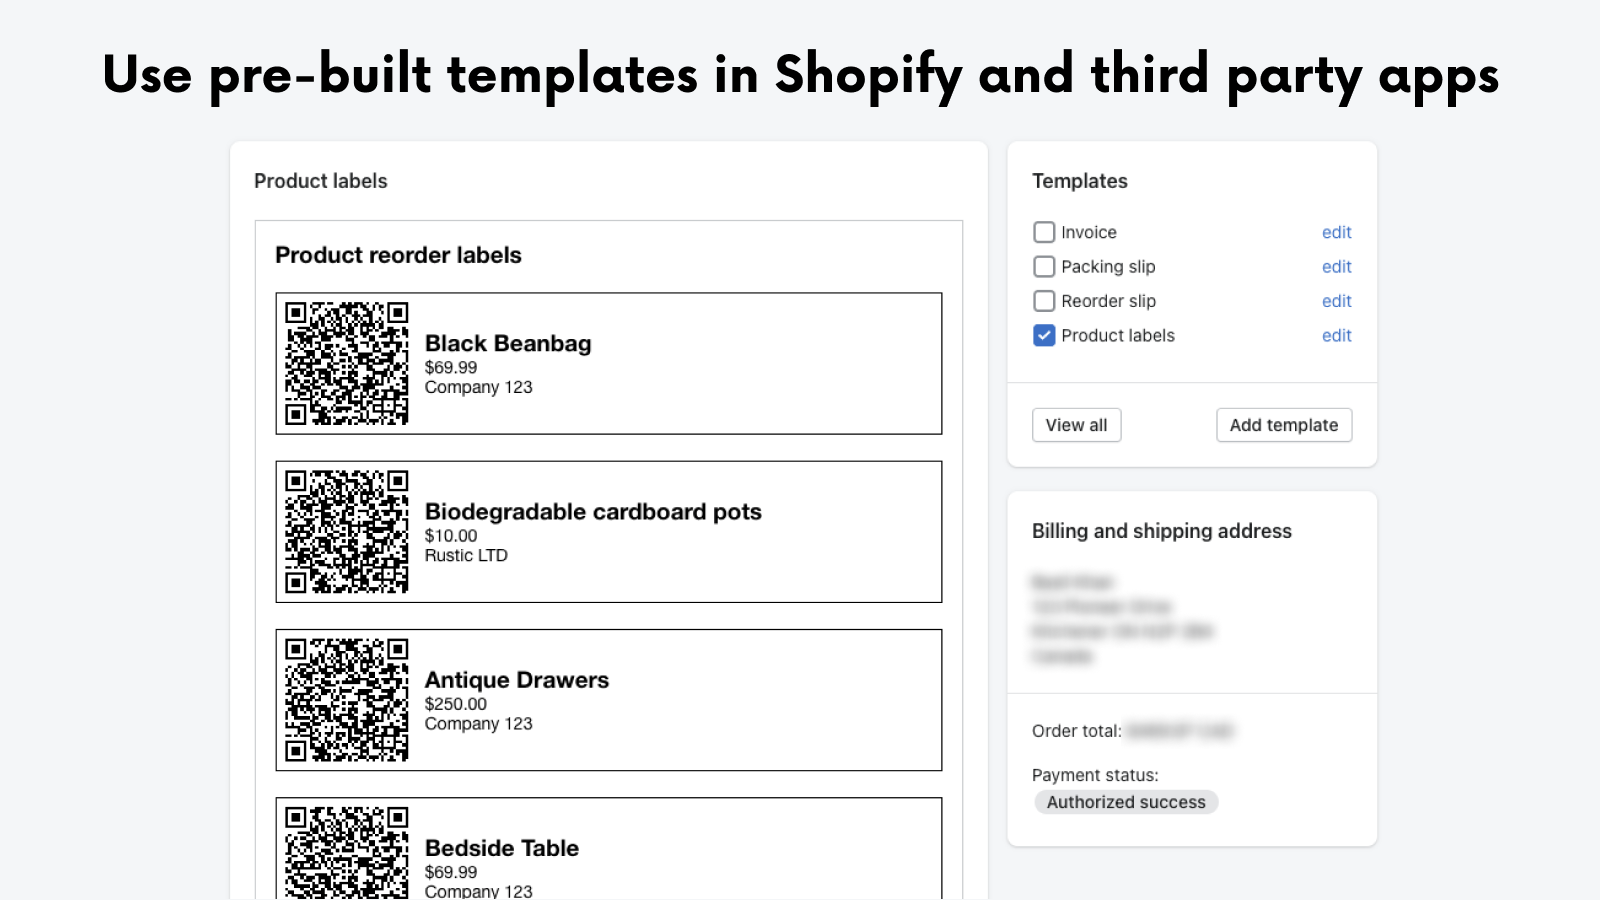 Use pre-built templates in Shopify and third party apps